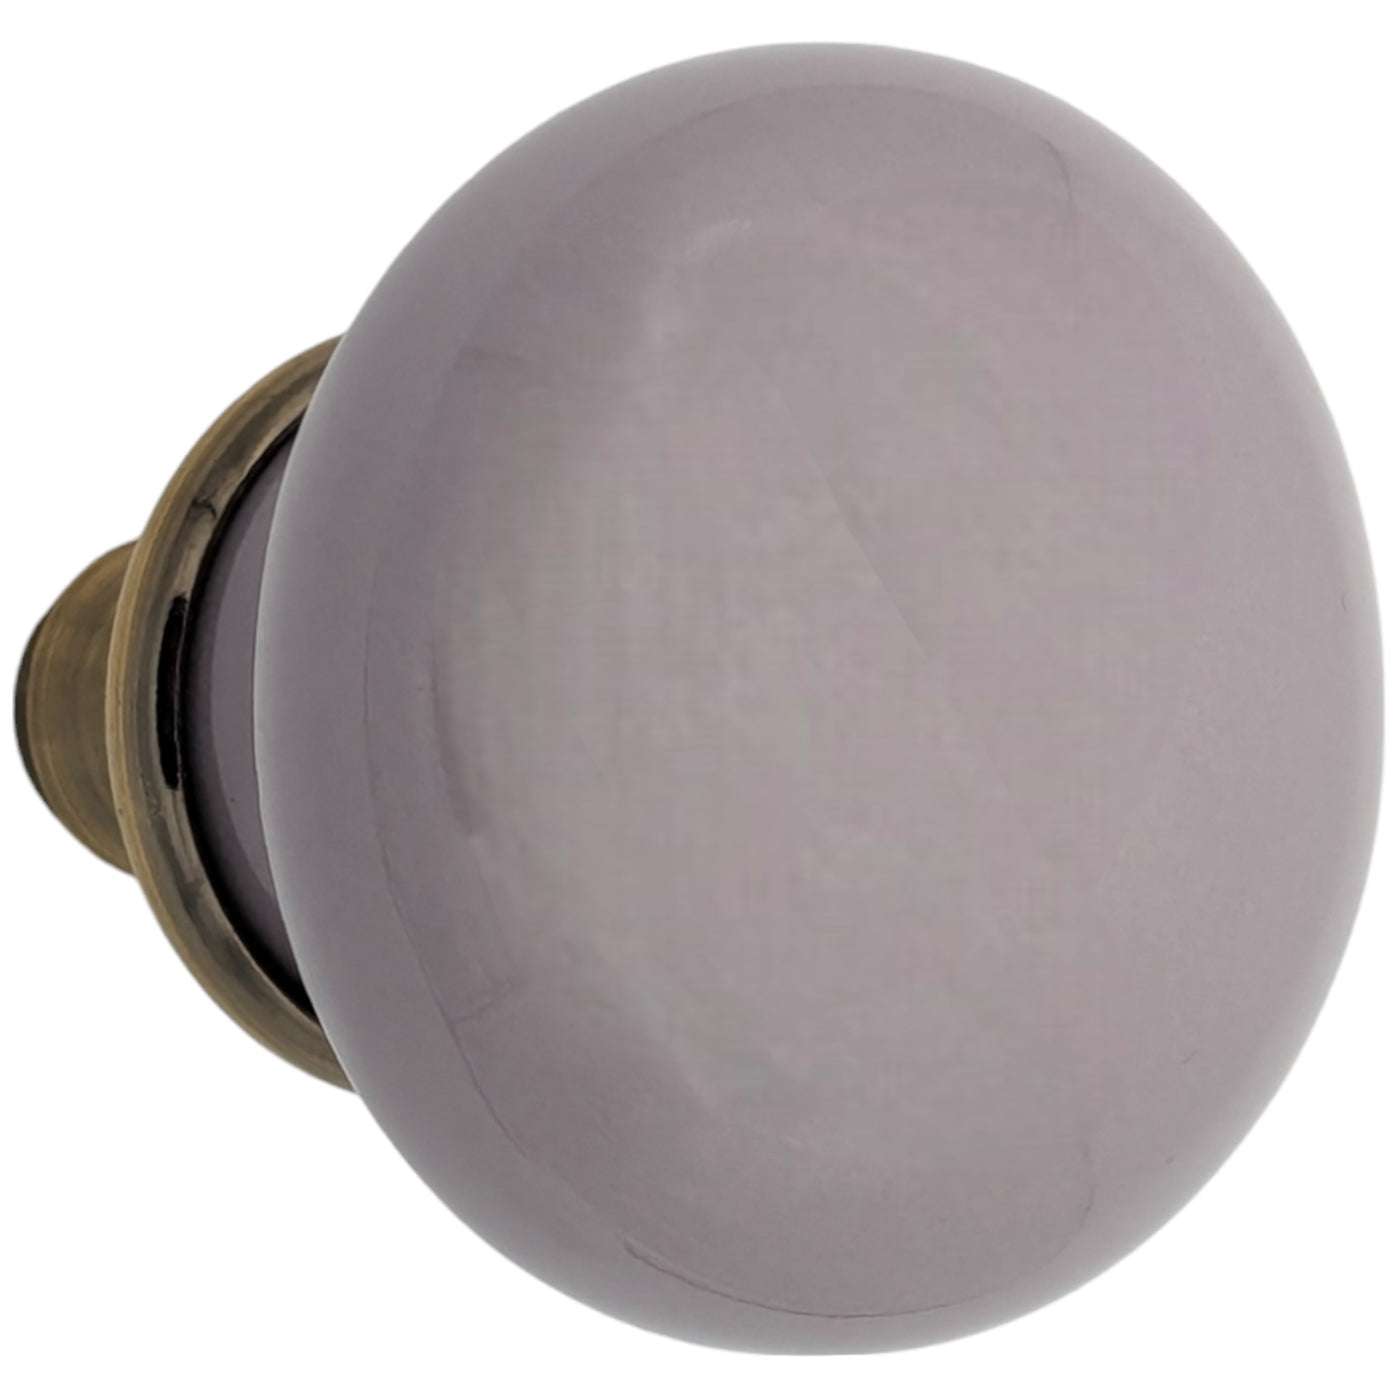 Gray Porcelain Spare Knob Set (Several Finishes Available)